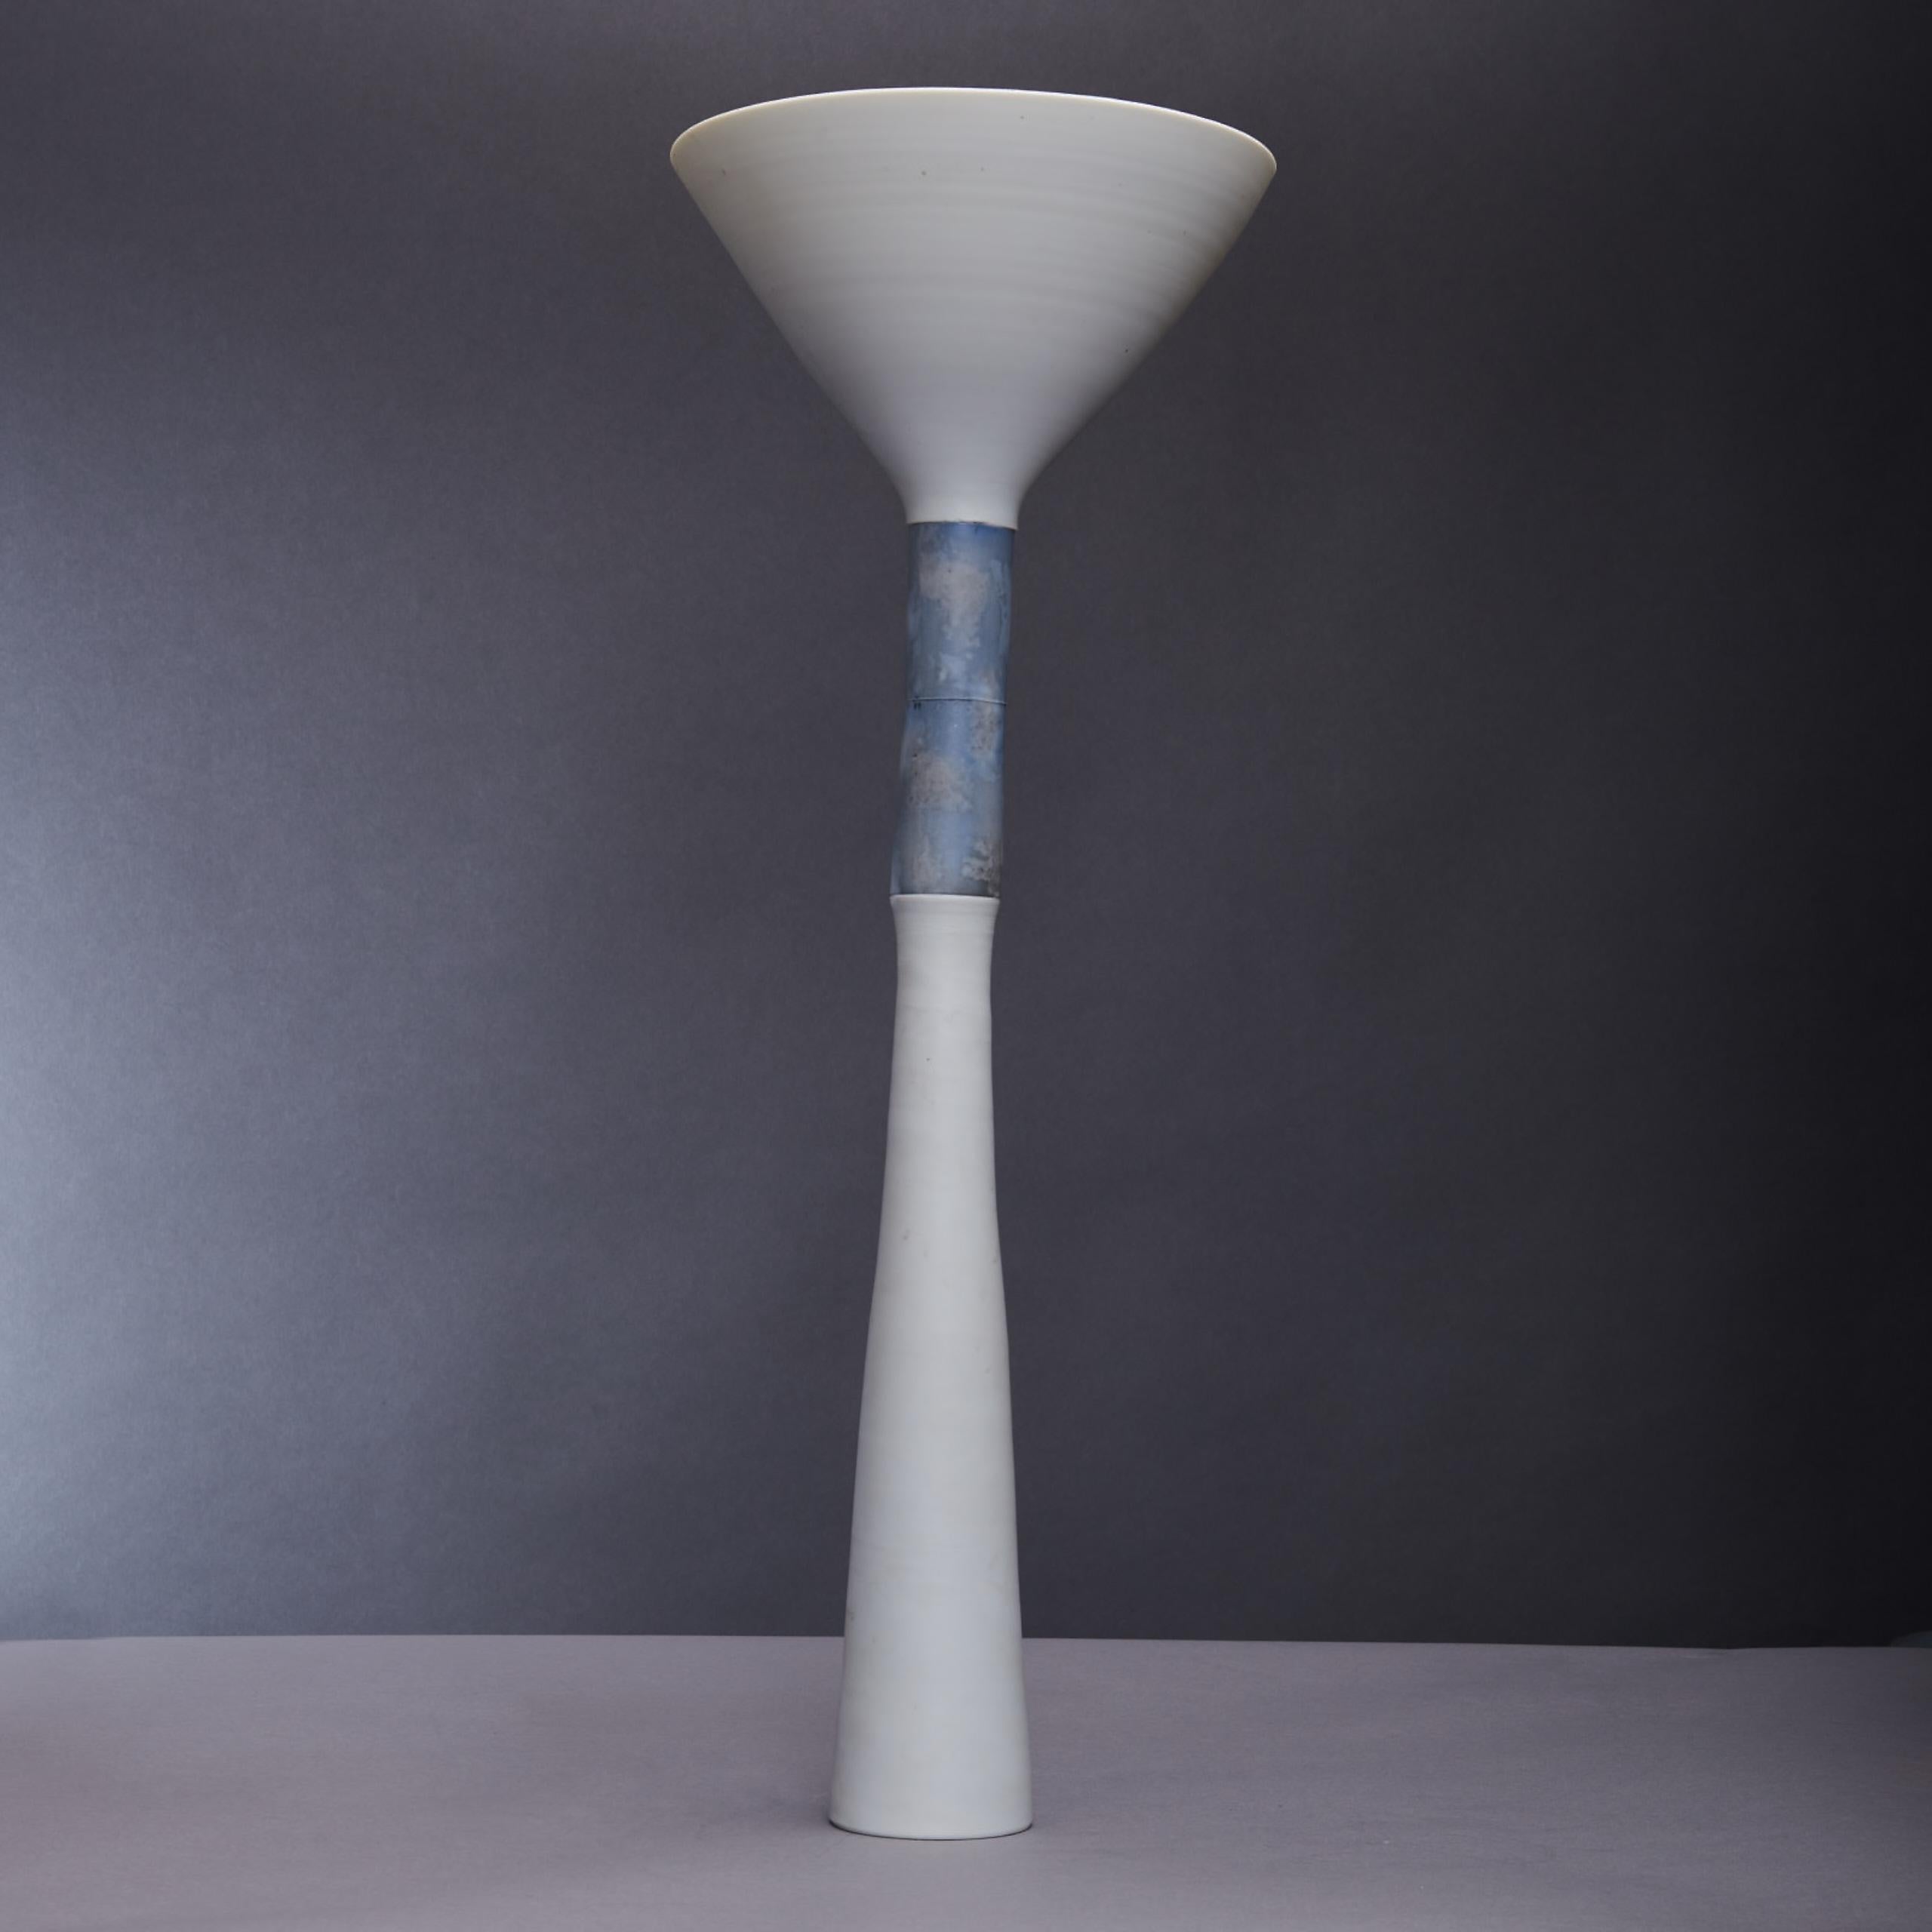 Tall elegant ornamental art vase or vessel by Thomas Naethe is turned on the wheel and assembled in porcelain. Although the work refers to vessel forms it is essentially sculptural in nature. Formal precision, harmony and clarity are words that are